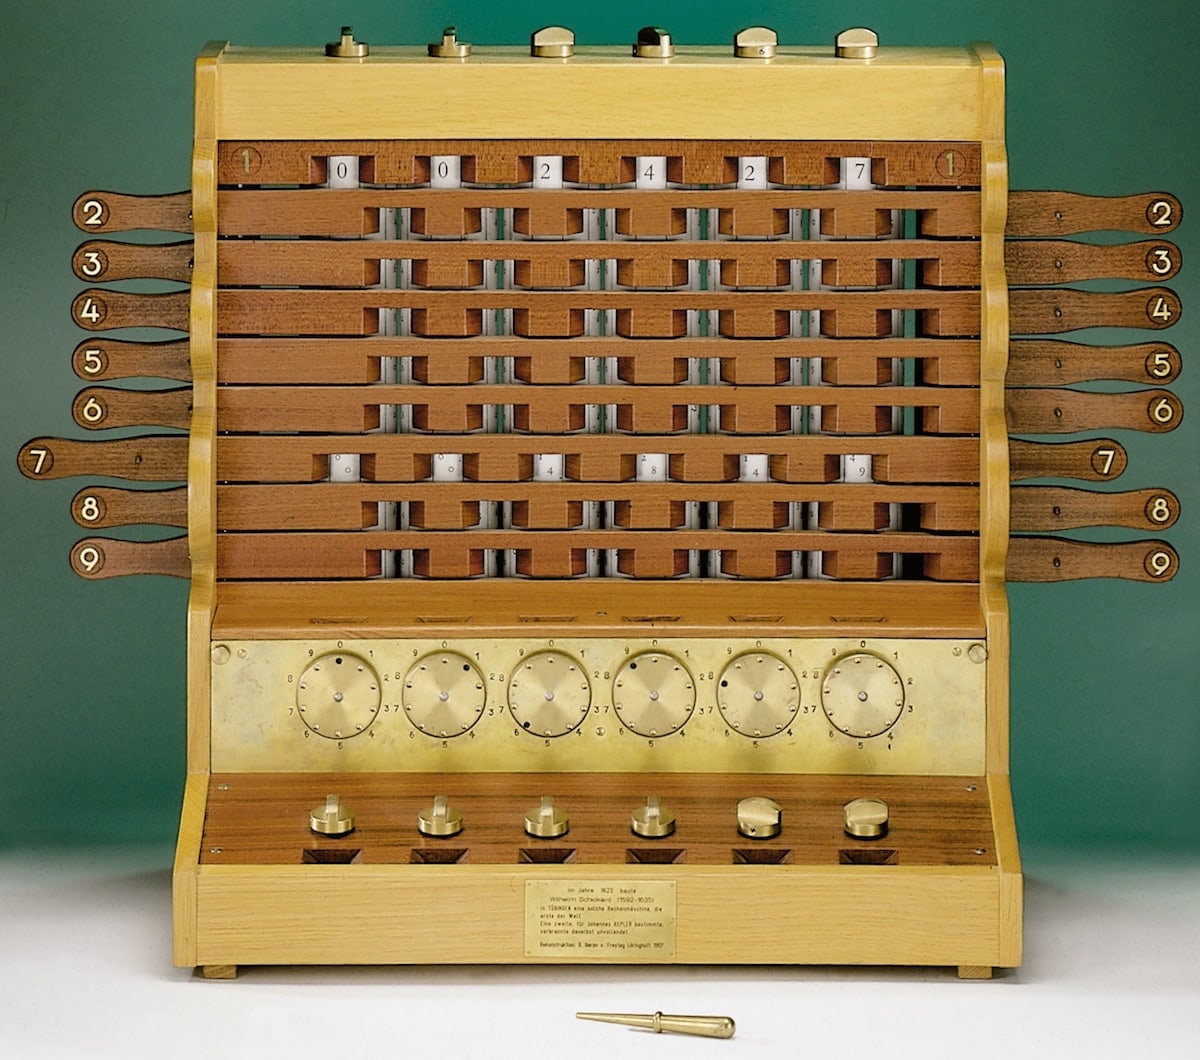 A modern reproduction of Wilhelm Schickard's <i>Rechenuhr</i>, or "calculating clock". At top is a set of Napier's bones to help with large multiplications, while the dials at the bottom drove an adding mechanism.